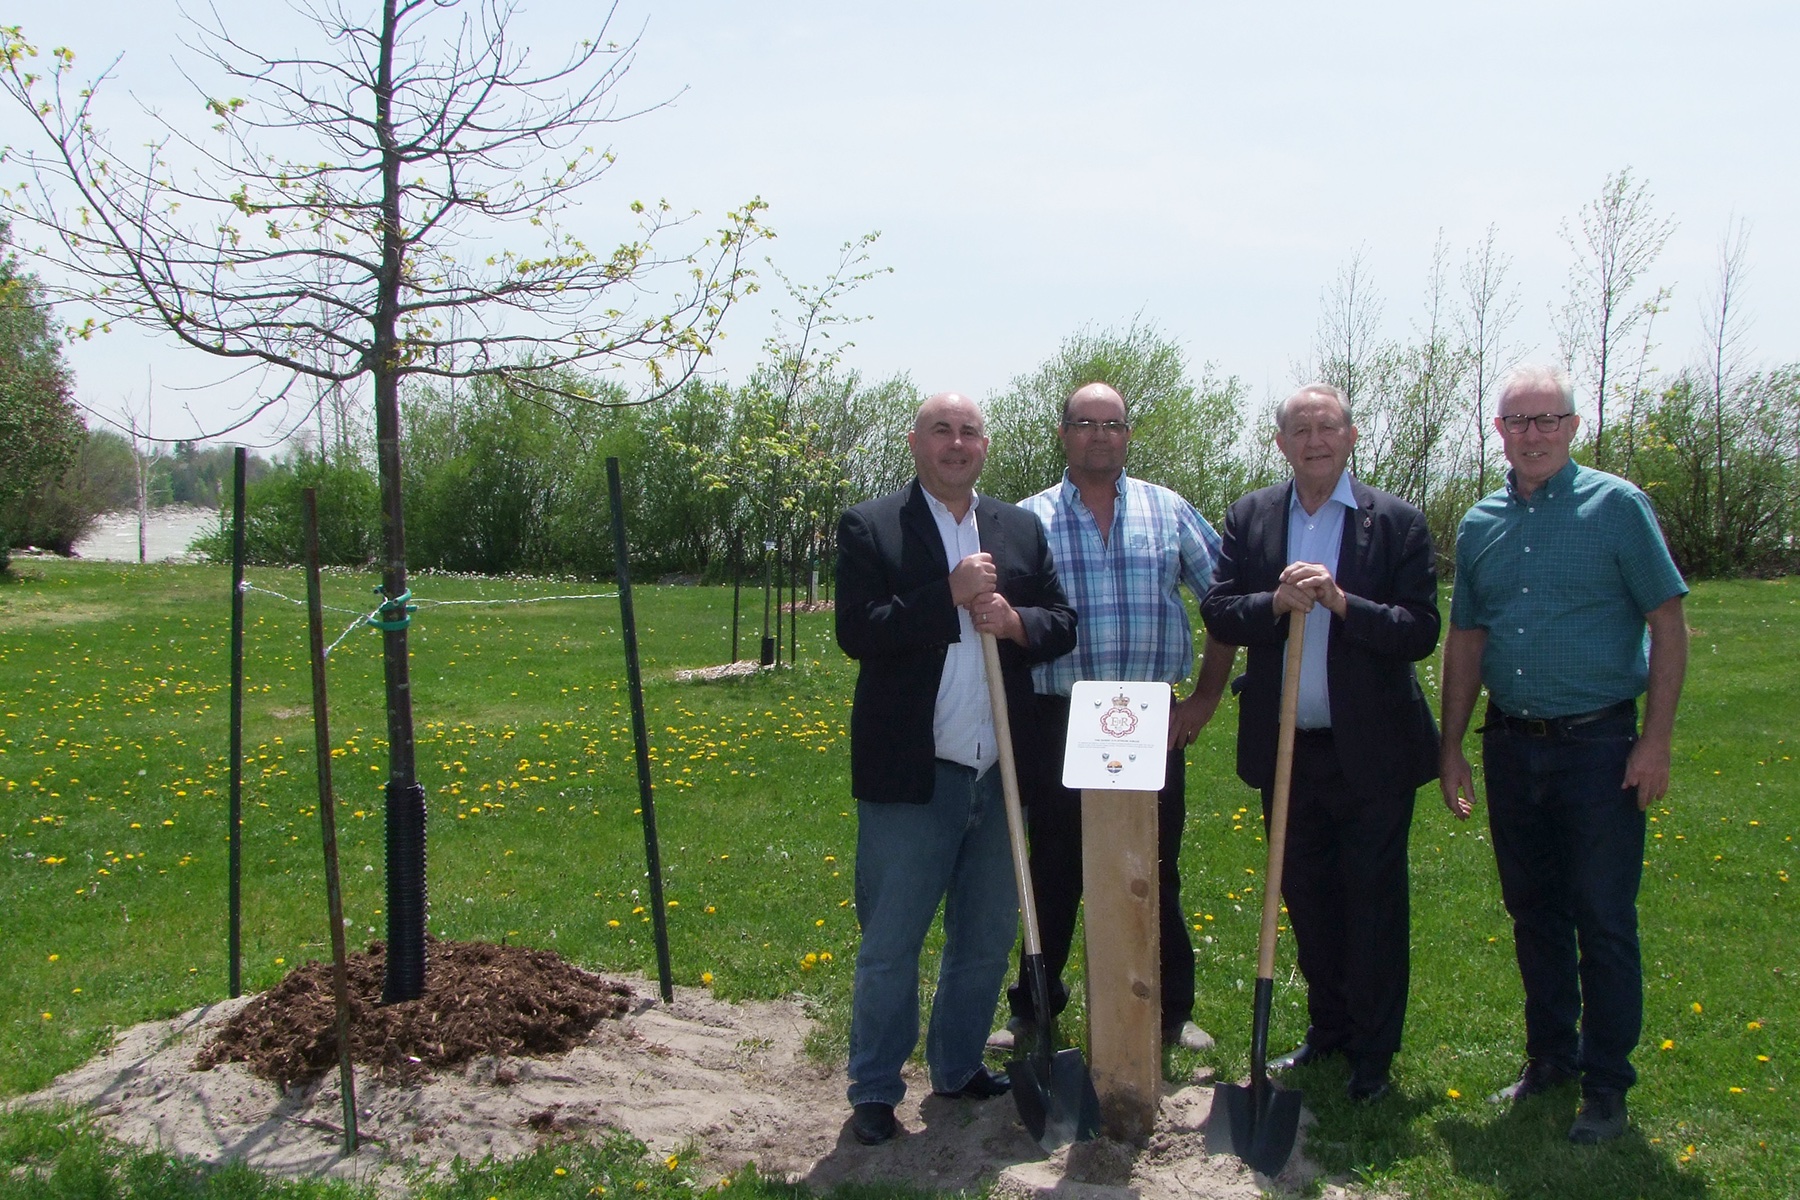 local township honours queens platinum jubilee with tree planting ceremony